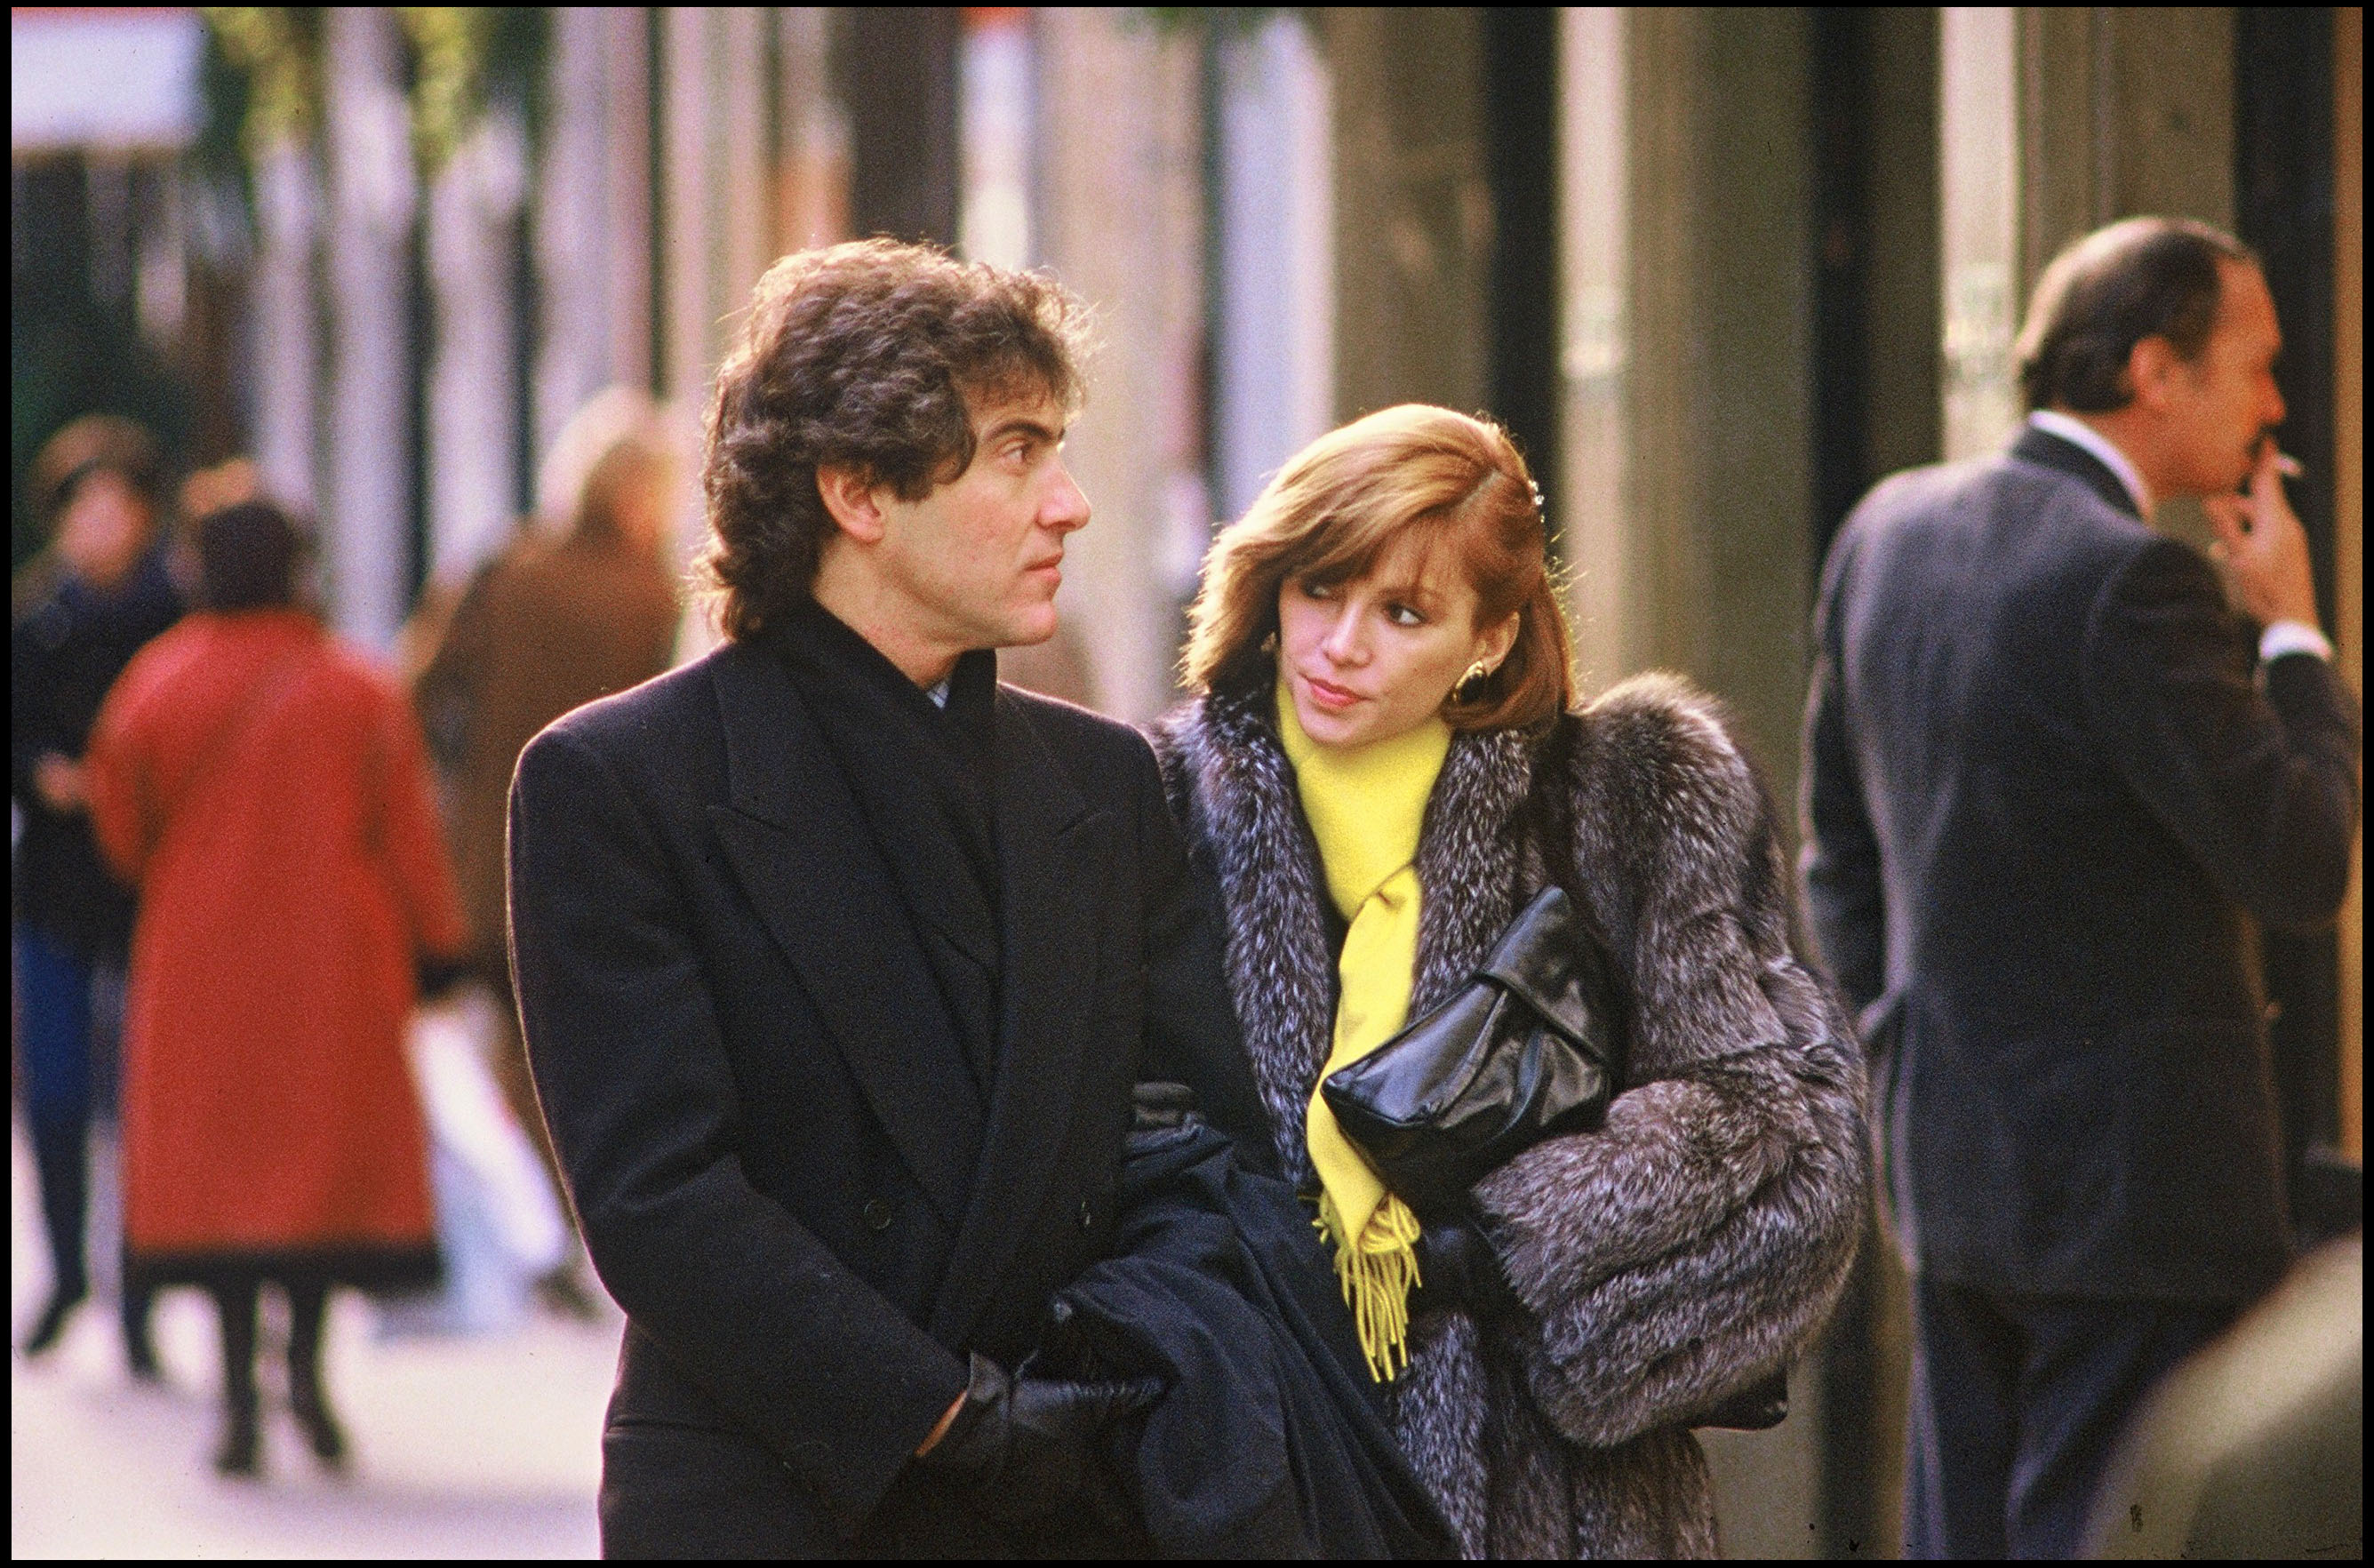 Victoria Principal and Harry Glassman in Paris, France on December 18, 1984 | Source: Getty Images